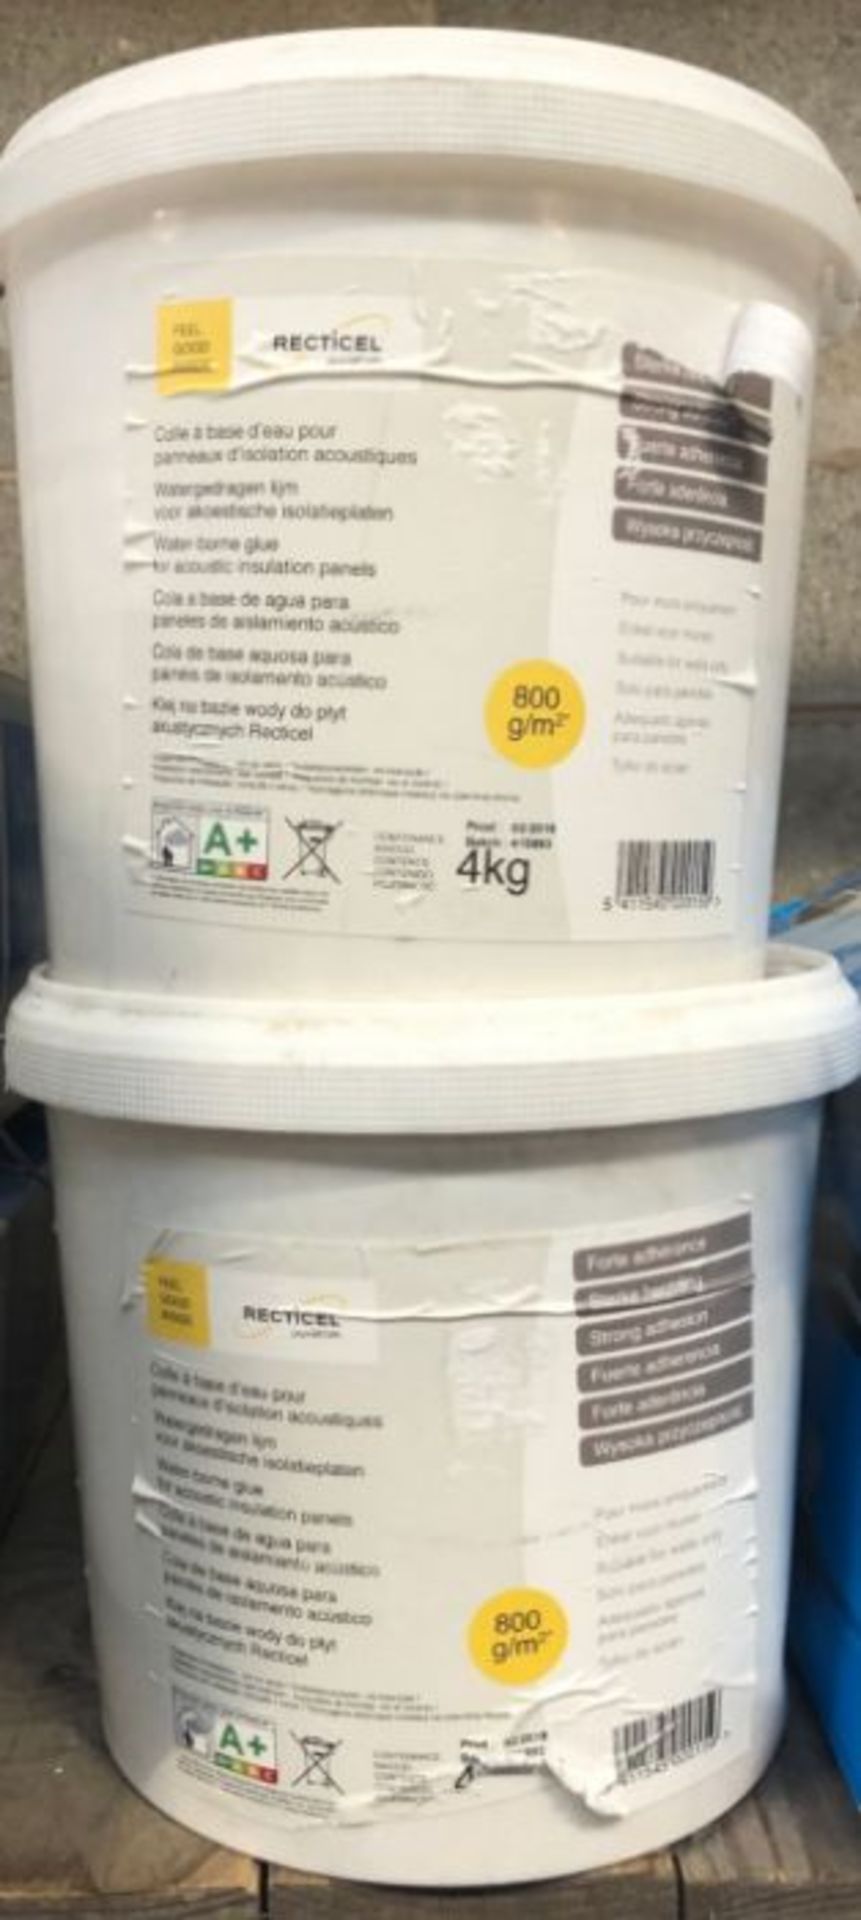 4 X TUBS OF RECTICEL INSTASOFT HIGH STRENGTH GRAB ADHESIVE 4L / COMBINED RRP £80.00 / CUSTOMER